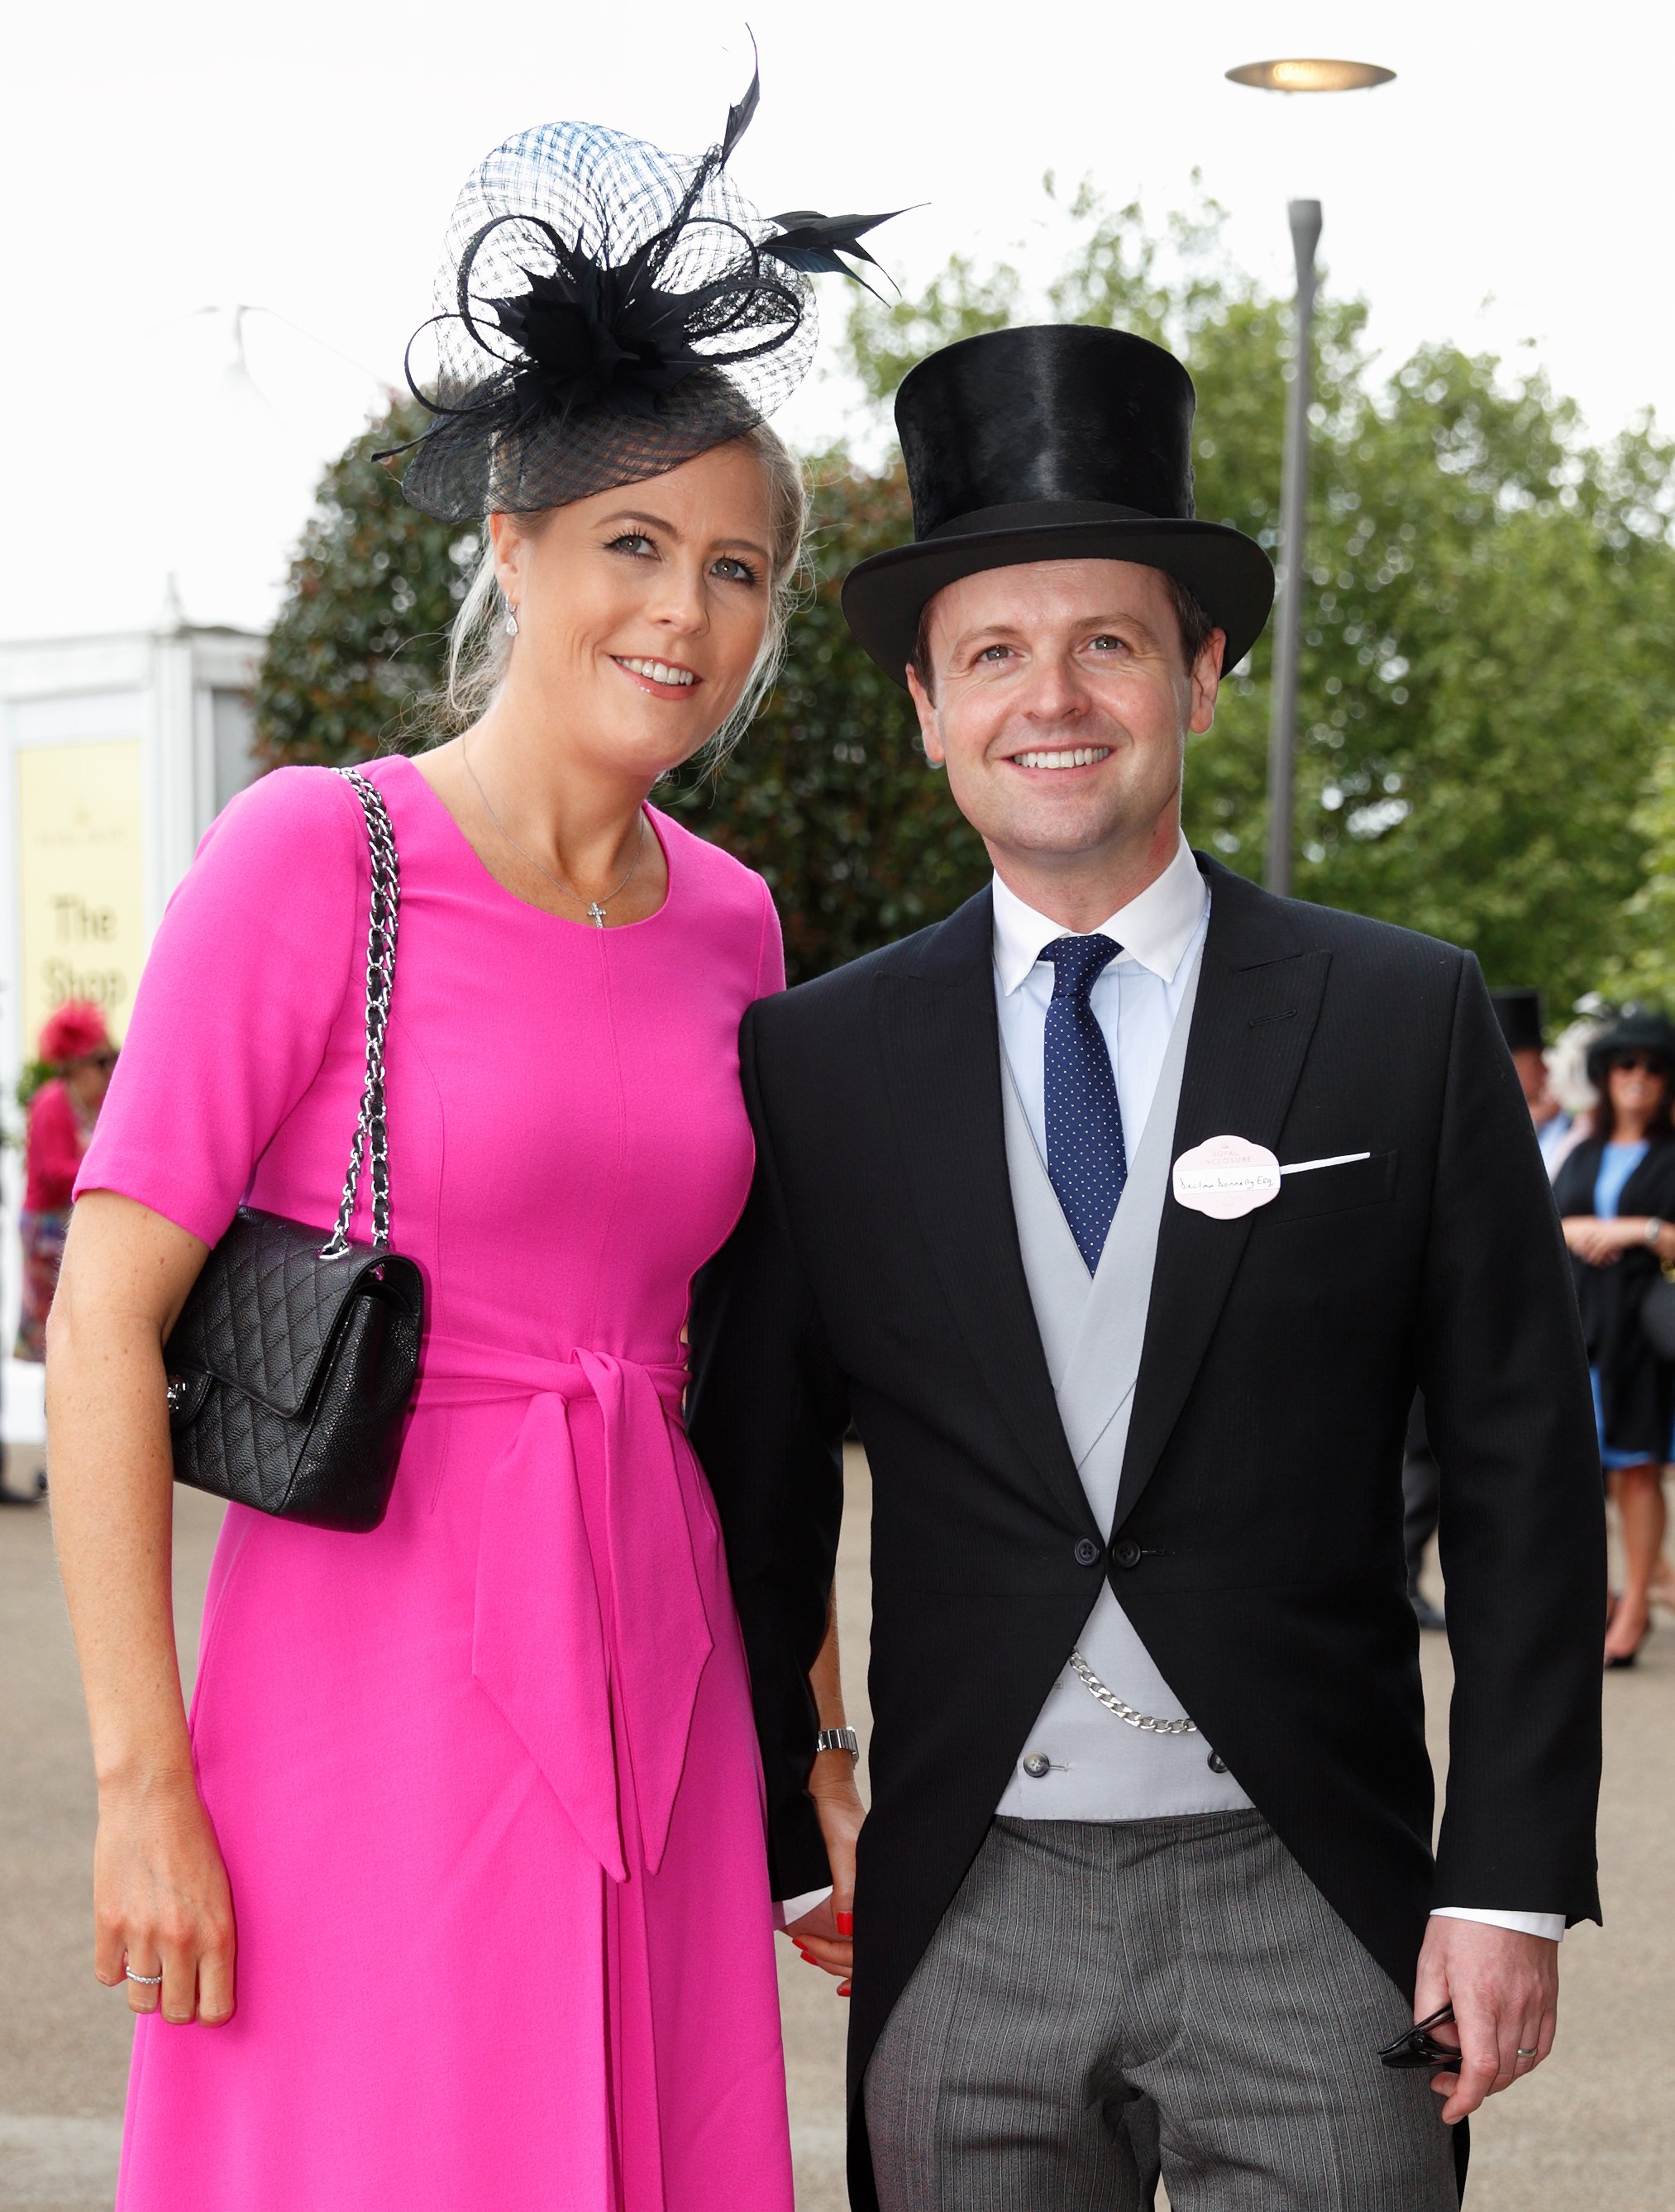 Ali Astall and Declan Donnelly at the Royal Ascot on June 15, 2016, in Ascot | Source: Getty Images